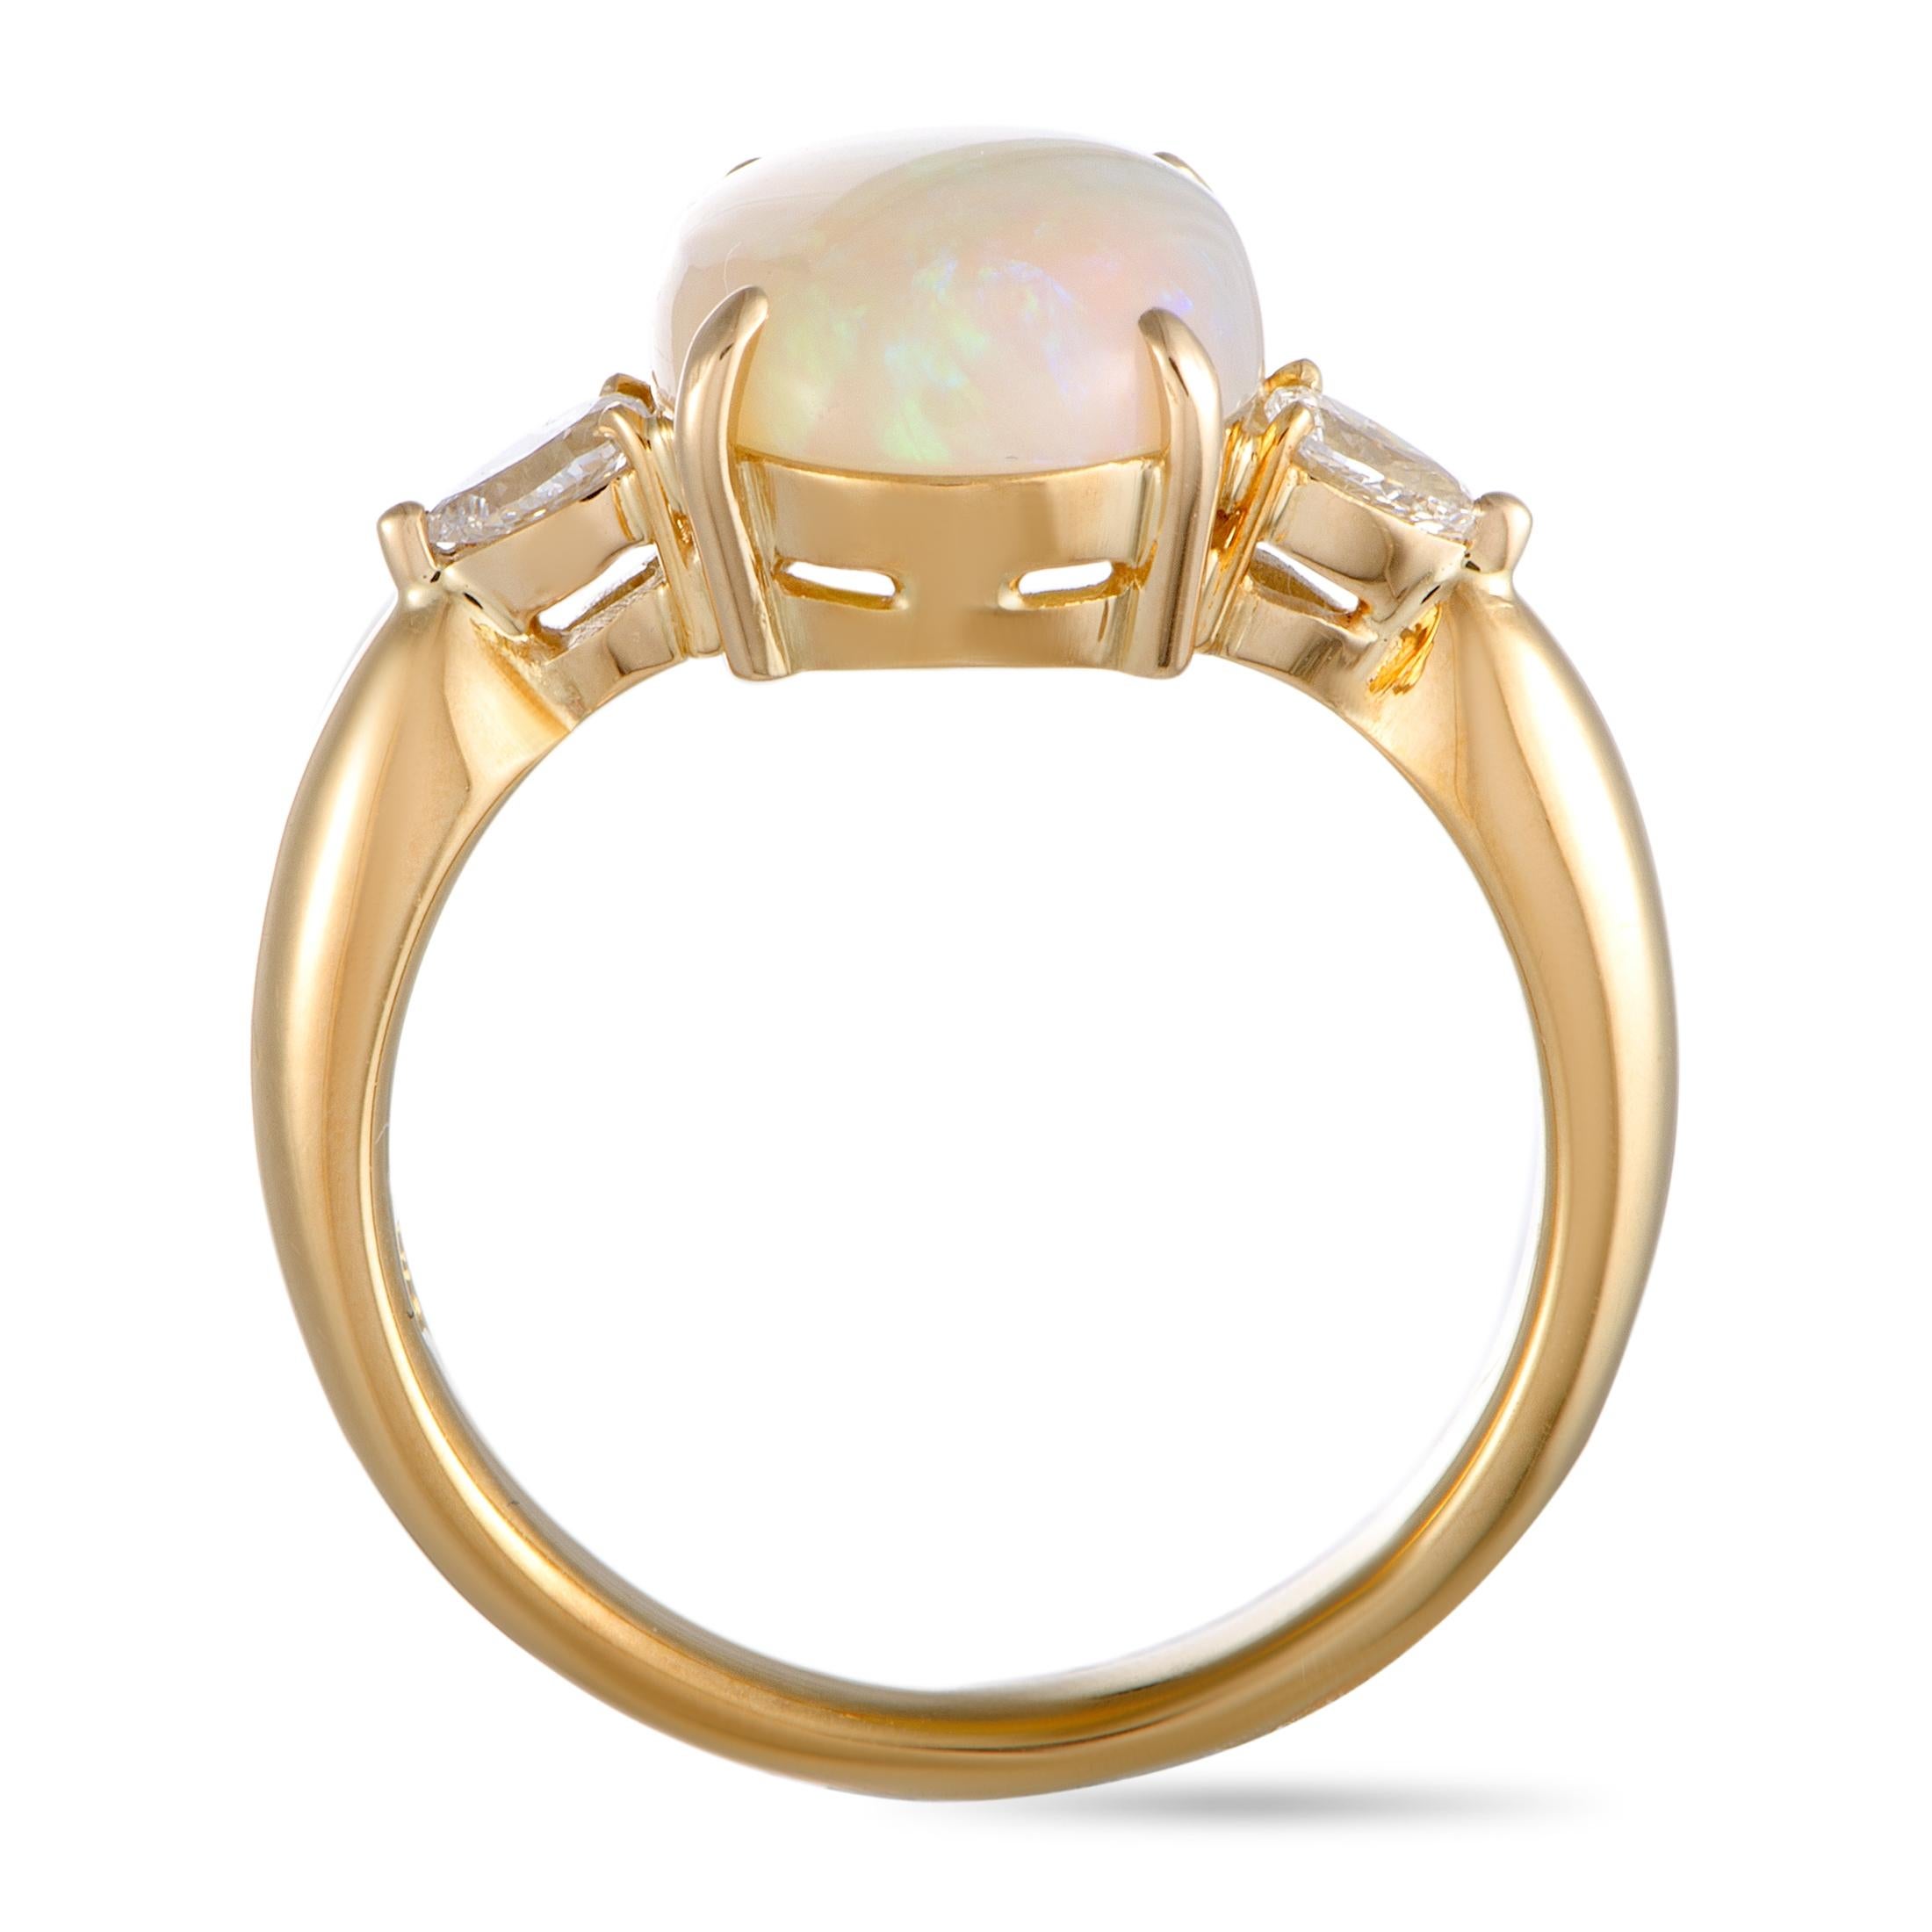 This ring is crafted from 18K yellow gold and set with an opal that weighs 3.05 carats and with pear diamonds that amount to 0.24 carats. The ring weighs 6.8 grams, boasting band thickness of 3 mm and top height of 6 mm, while top dimensions measure